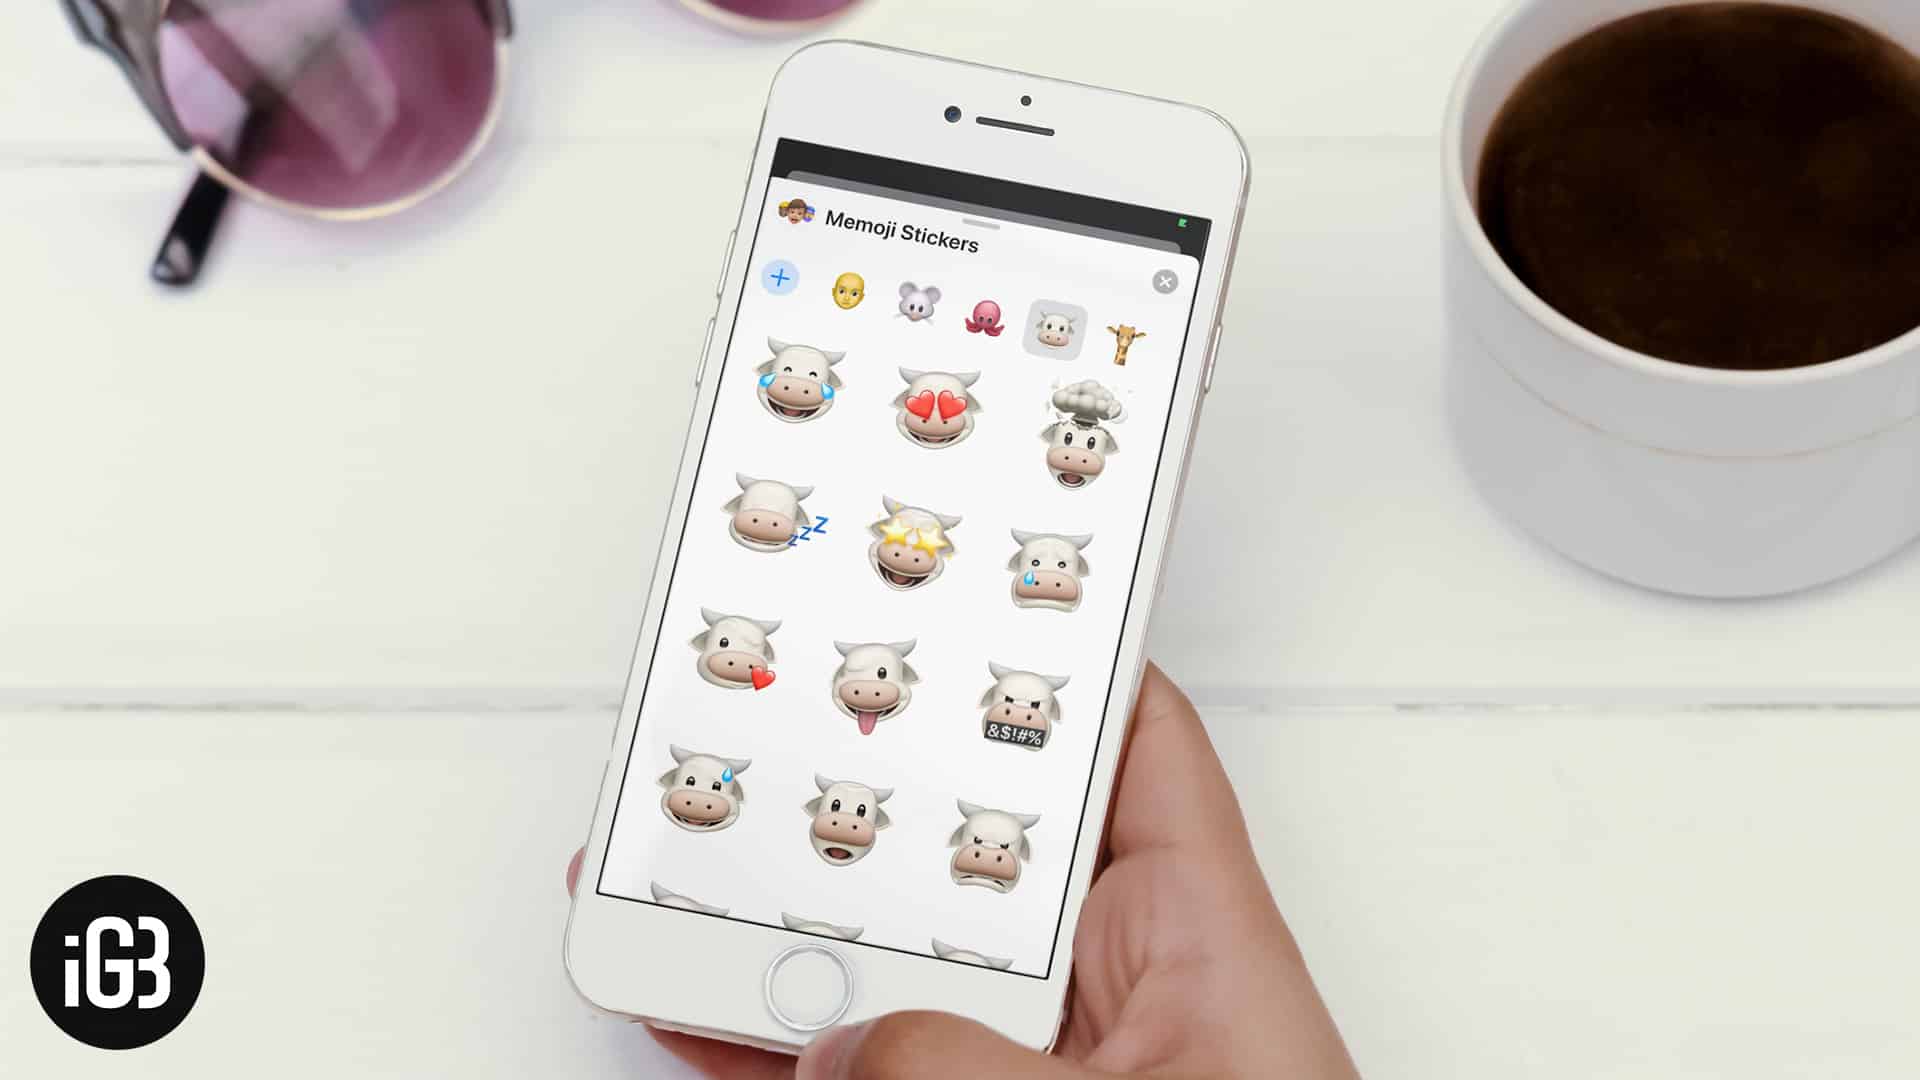 How to Use Memoji Stickers in iOS 13 on iPhone